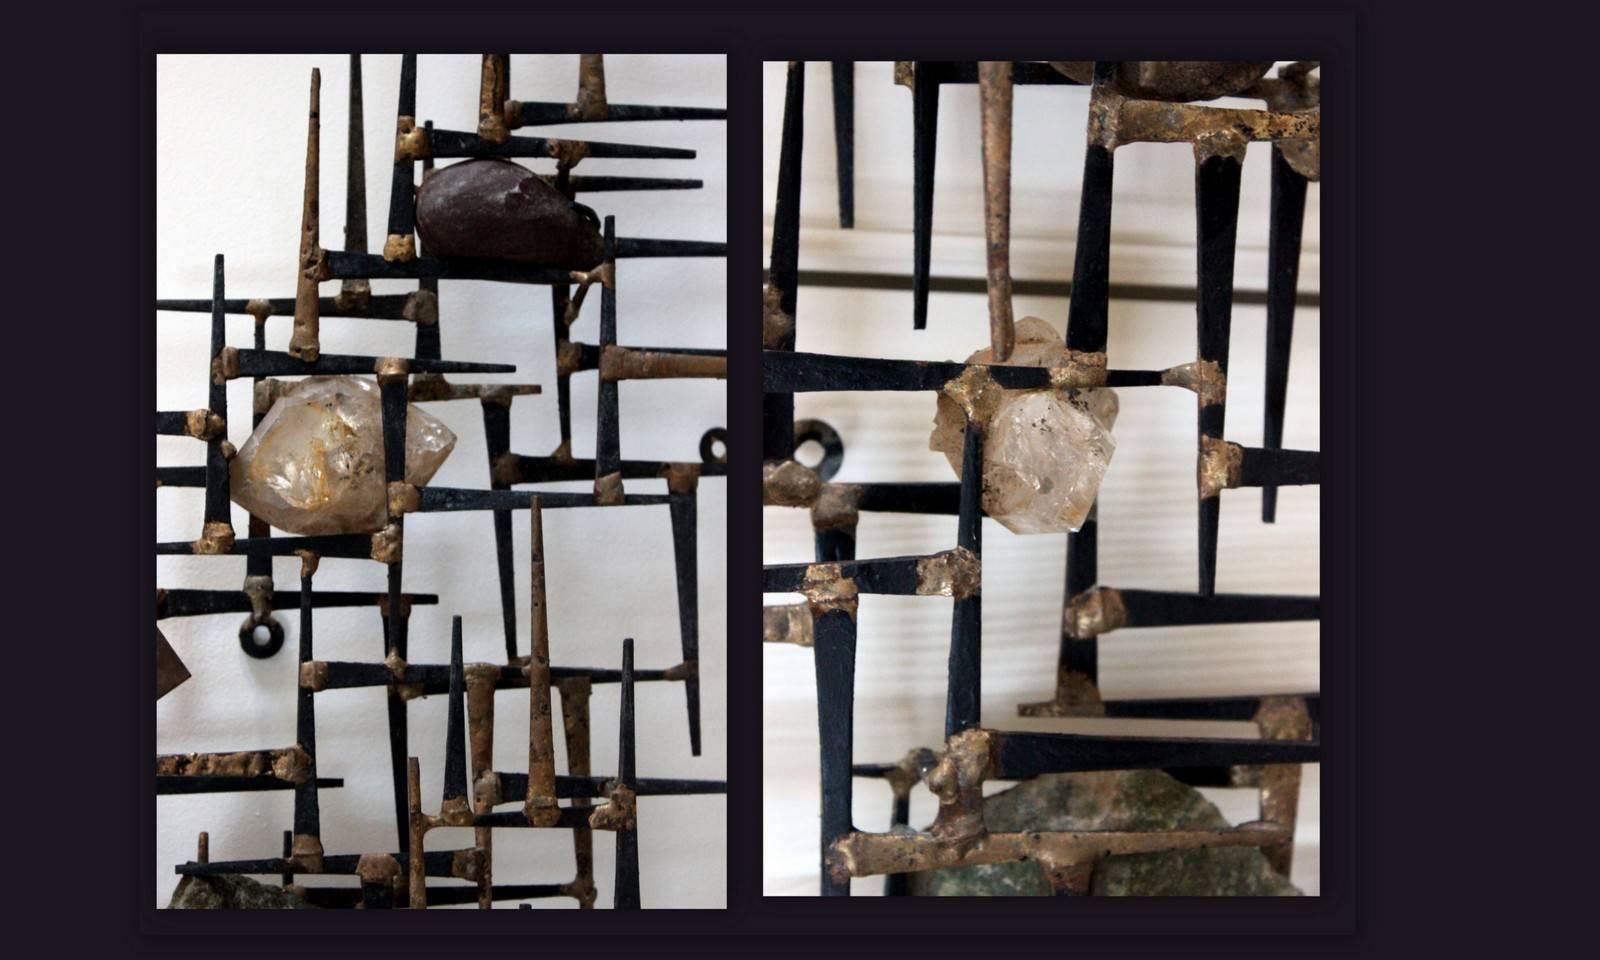 Wrought Iron Brutalist Abstract Wall Mount Sculpture with Quartz Pieces by Jim Gary